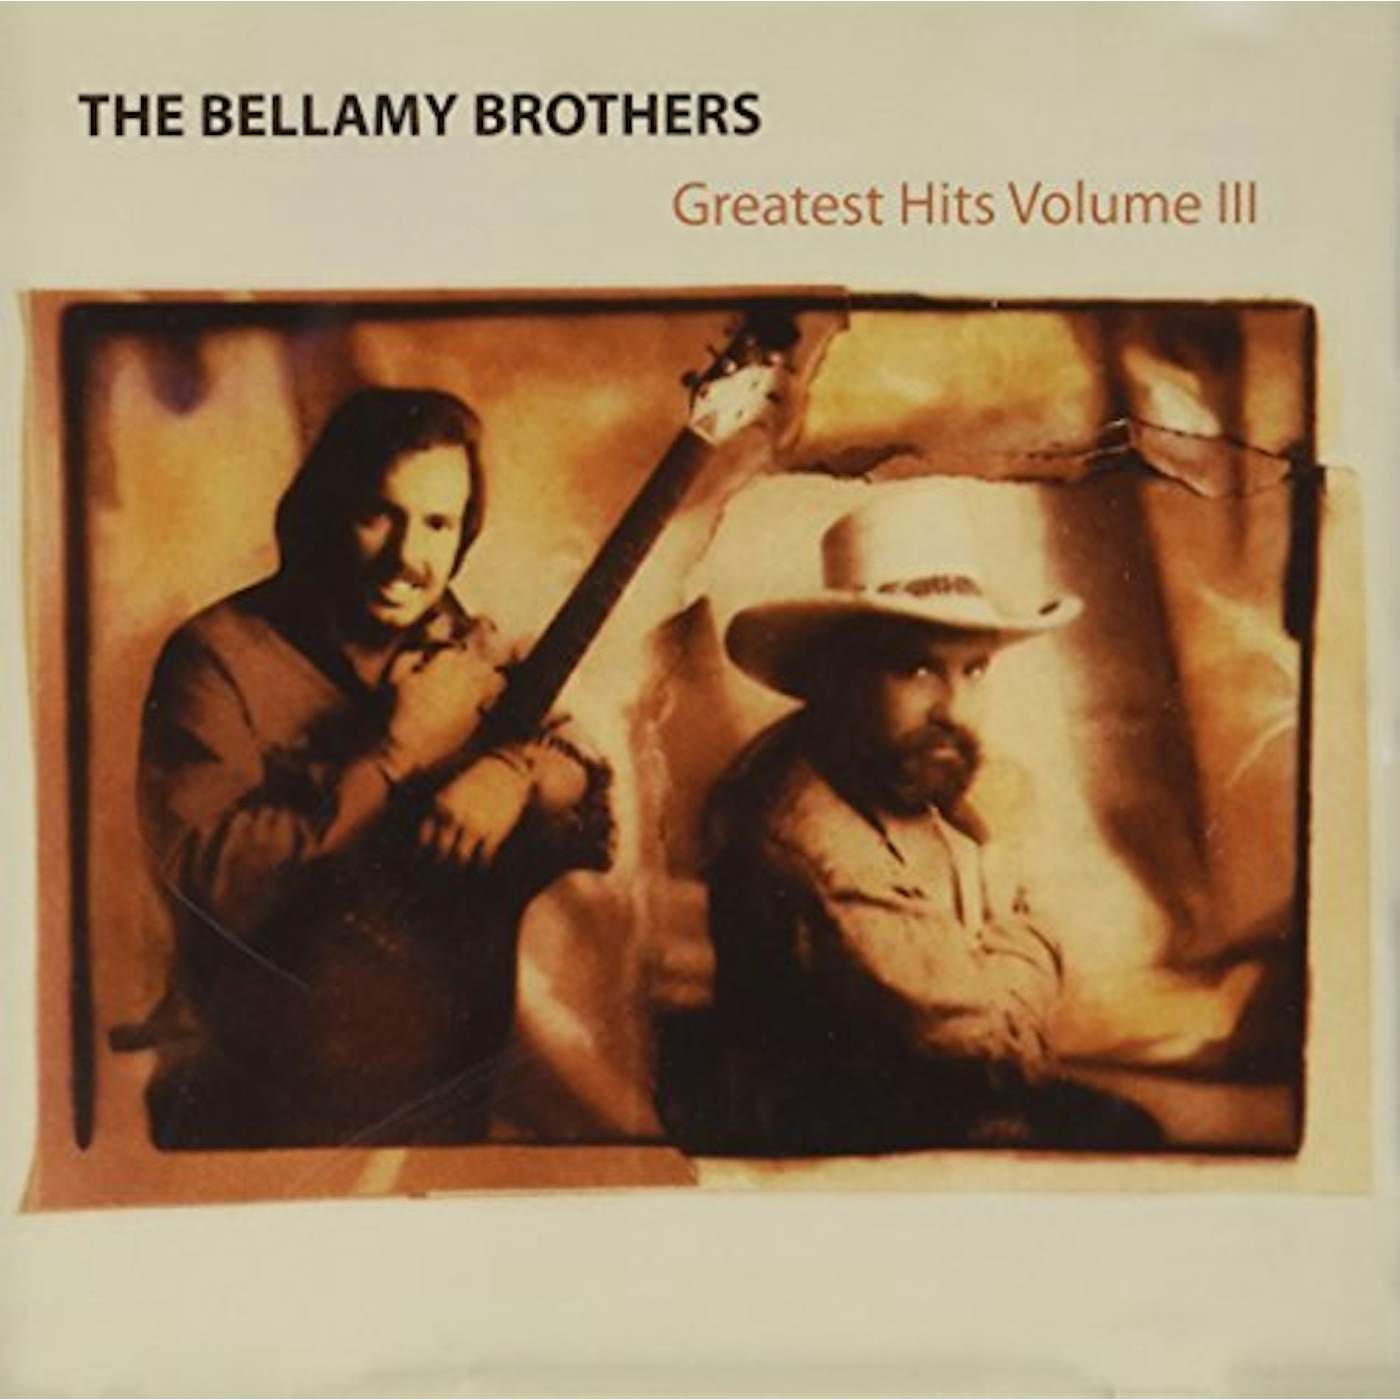 The Bellamy Brothers VOL. 3-GREATEST HITS CD